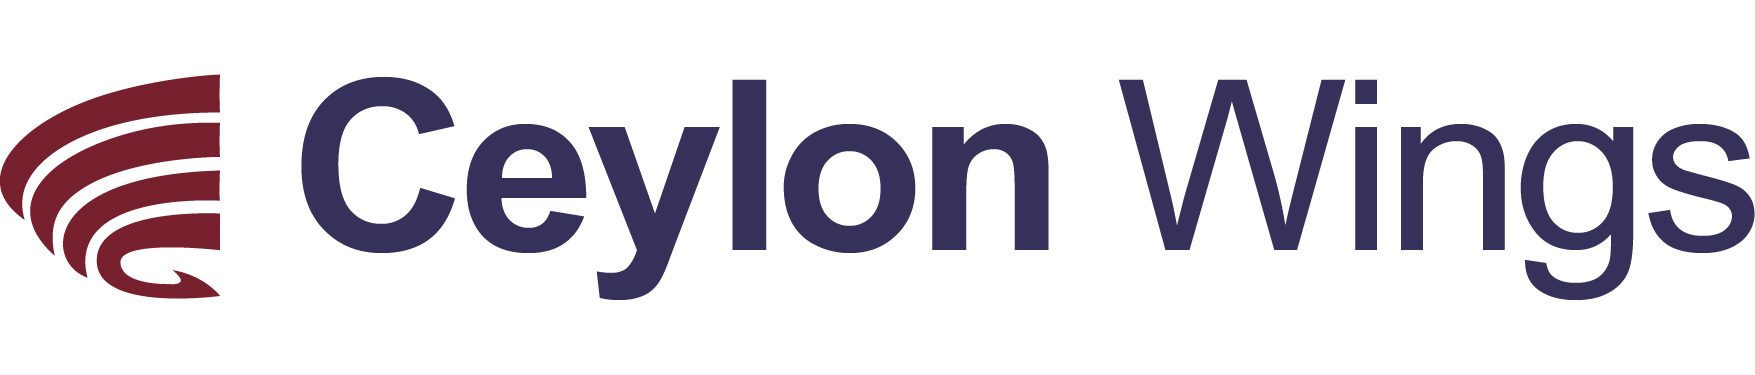 Ceylon Wings Holdings (Private) Limited